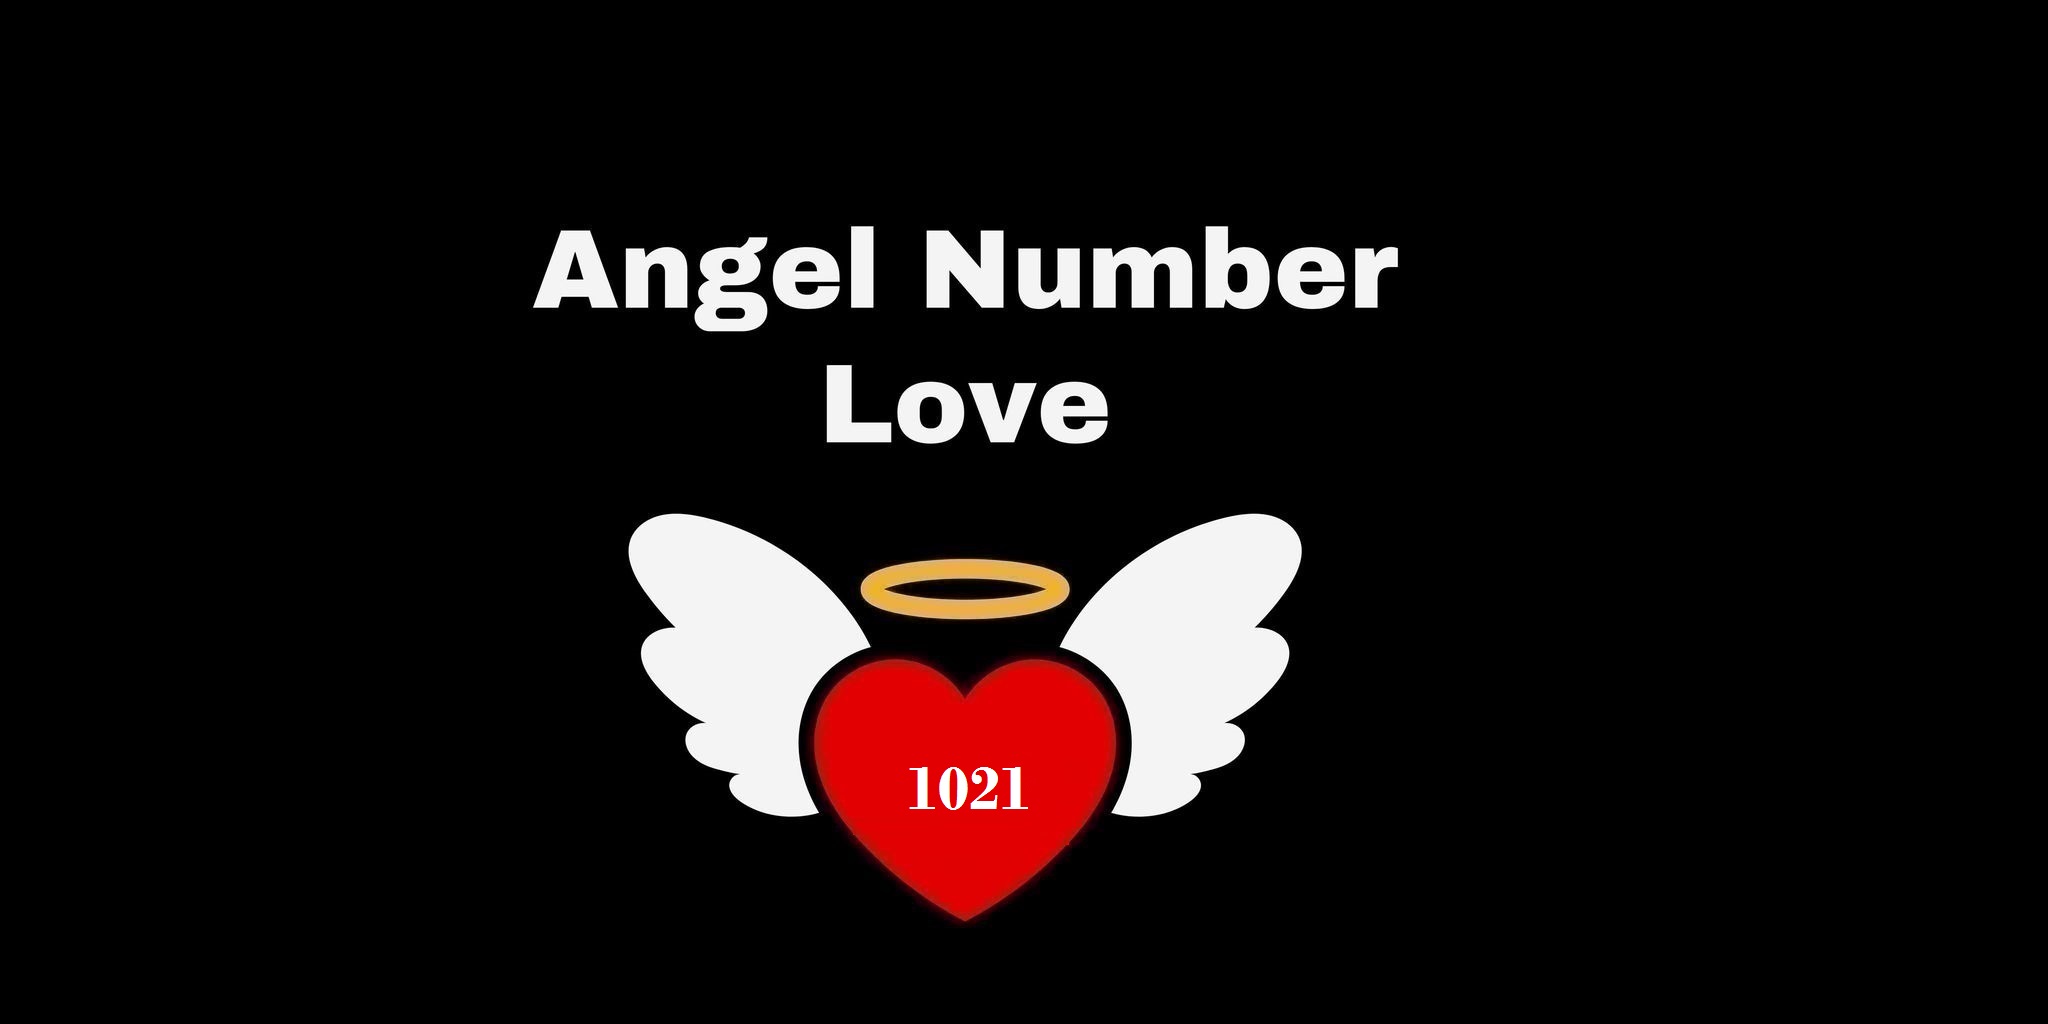 1021 Angel Number Meaning In Love